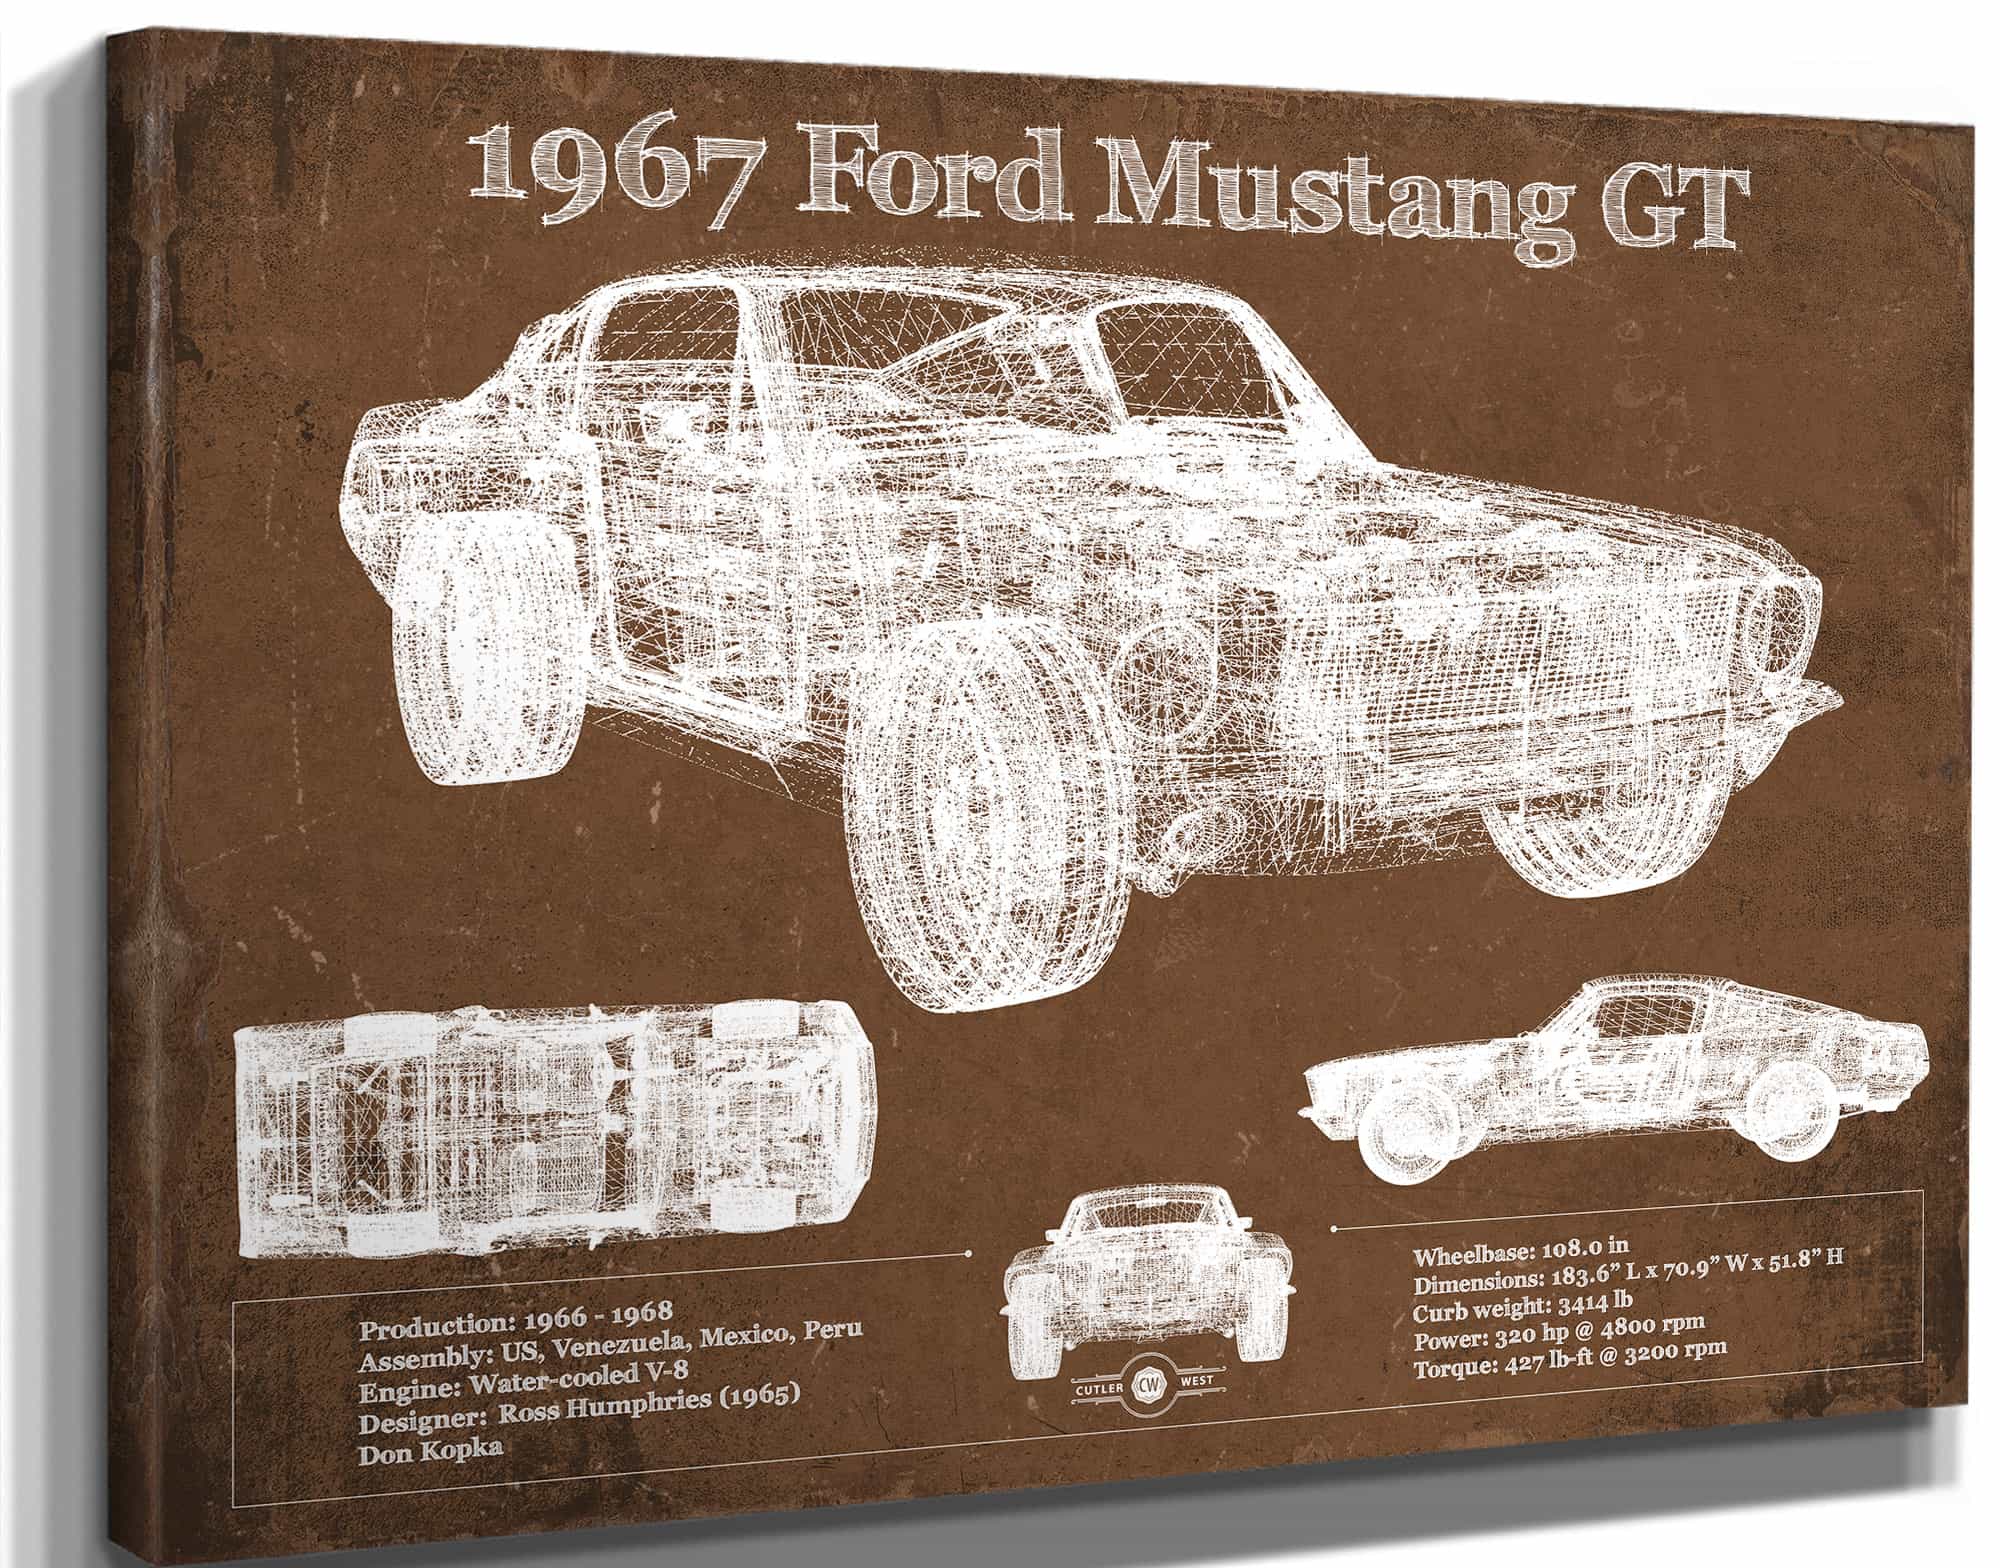 1967 Ford Mustang GT Blueprint Vintage Auto Print